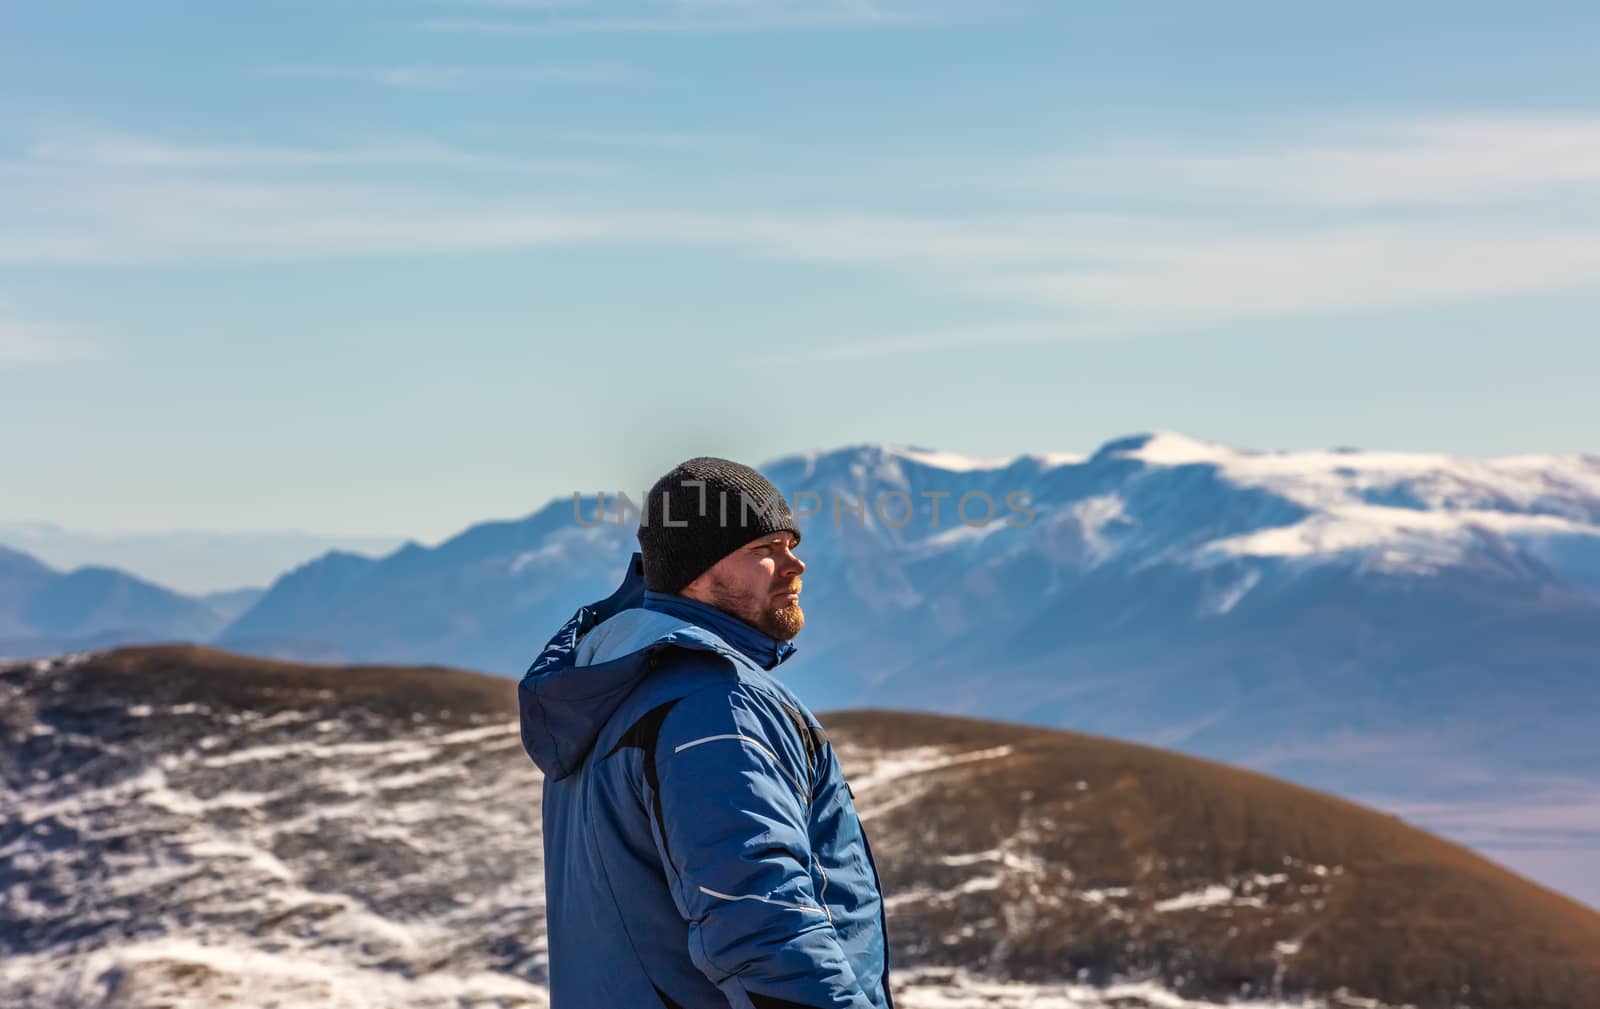 View of a tourist looking in the distance in the mountains. White snowy mountain ridge and beautiful blue cloudy sky as a background and slightly out of focus. Altai mountains, Siberia, Russia.